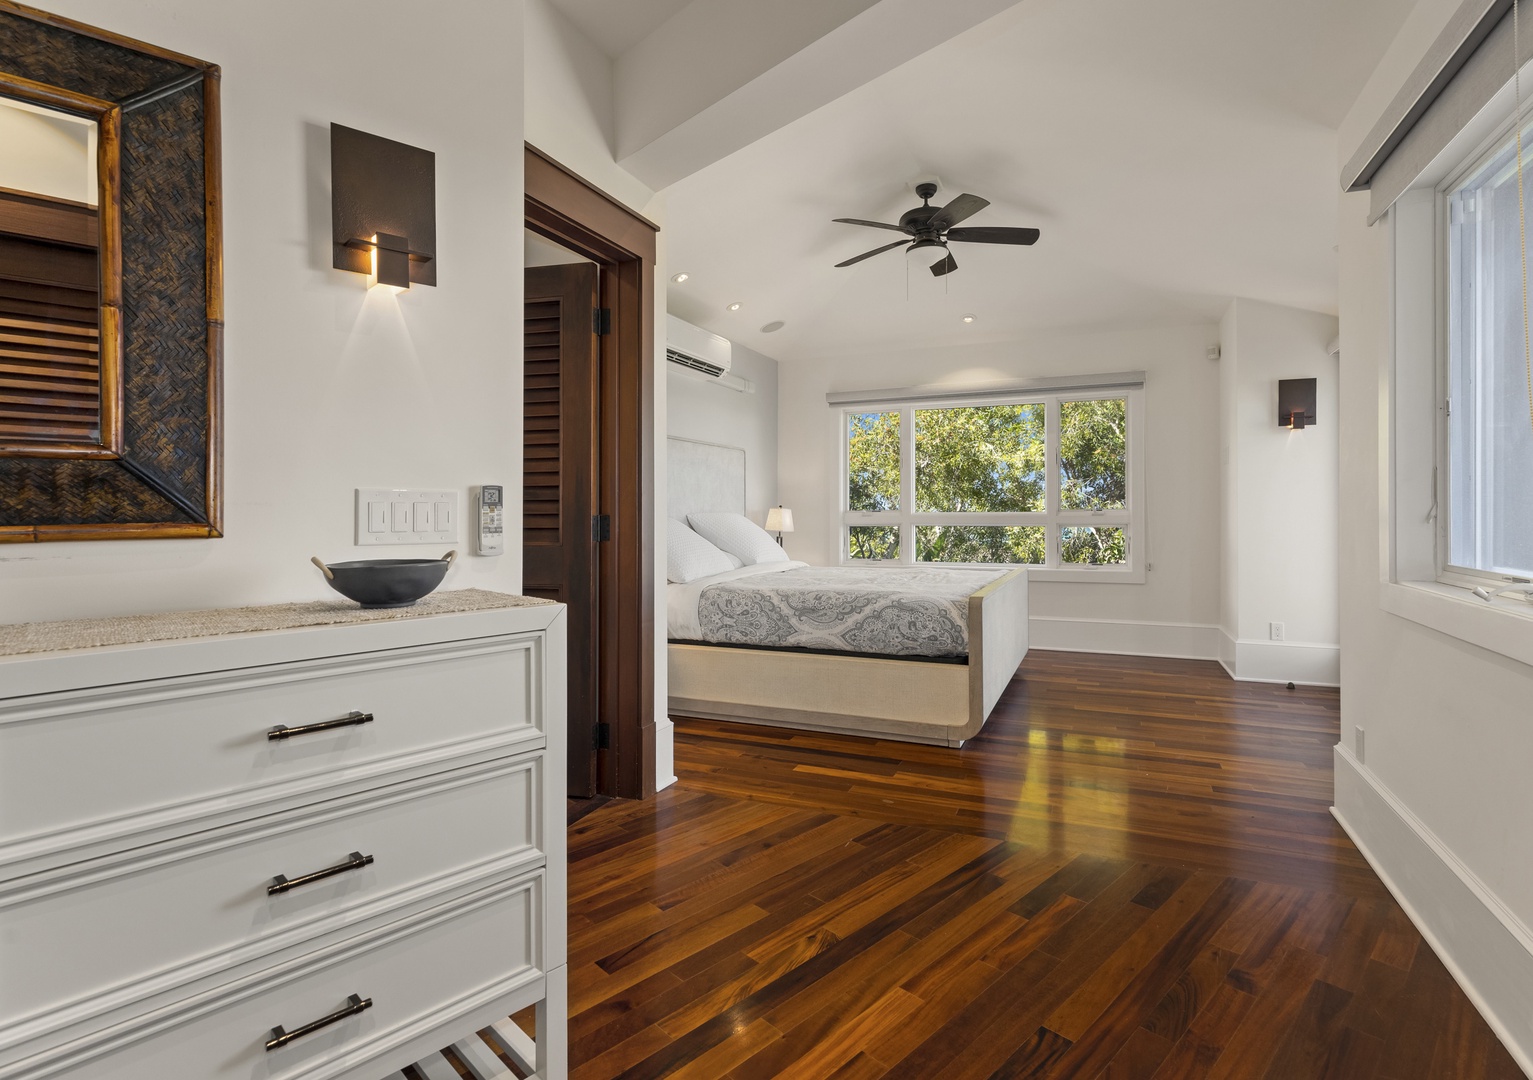 Kailua Vacation Rentals, Lanikai Villa - This spacious primary bedroom is fit for luxurious living